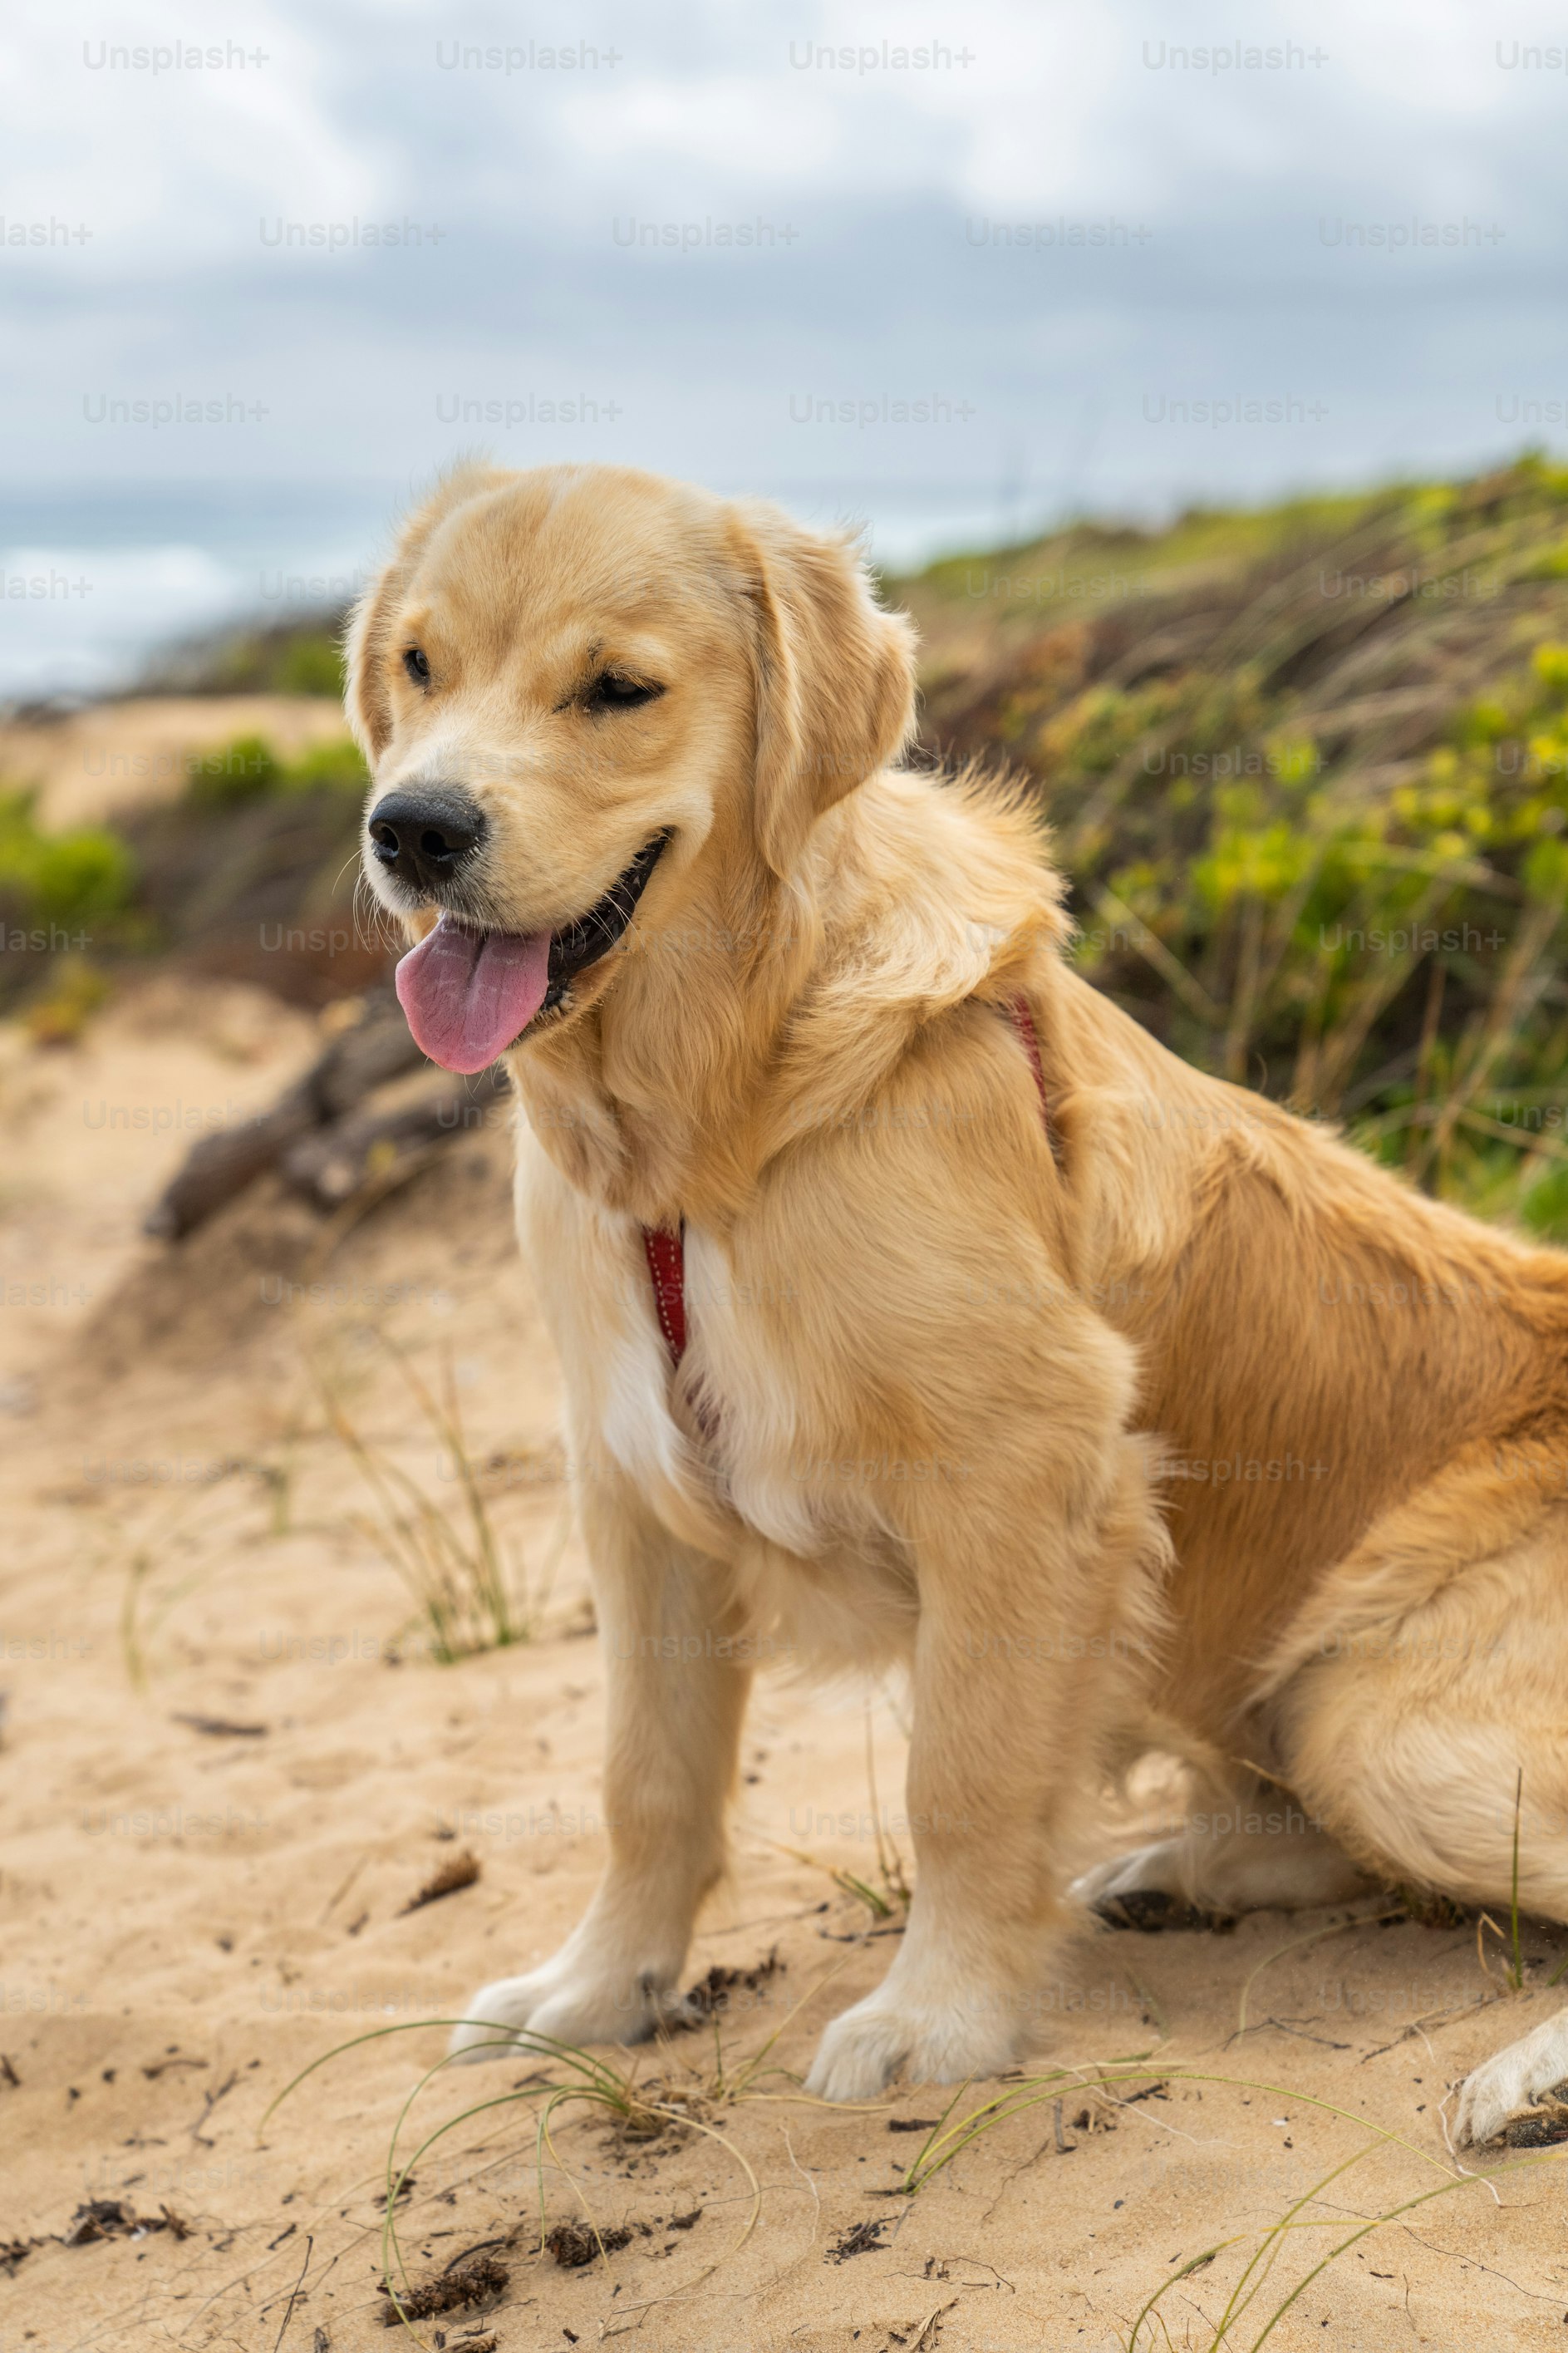 Activities to Keep Golden Retrievers Mentally Enriched